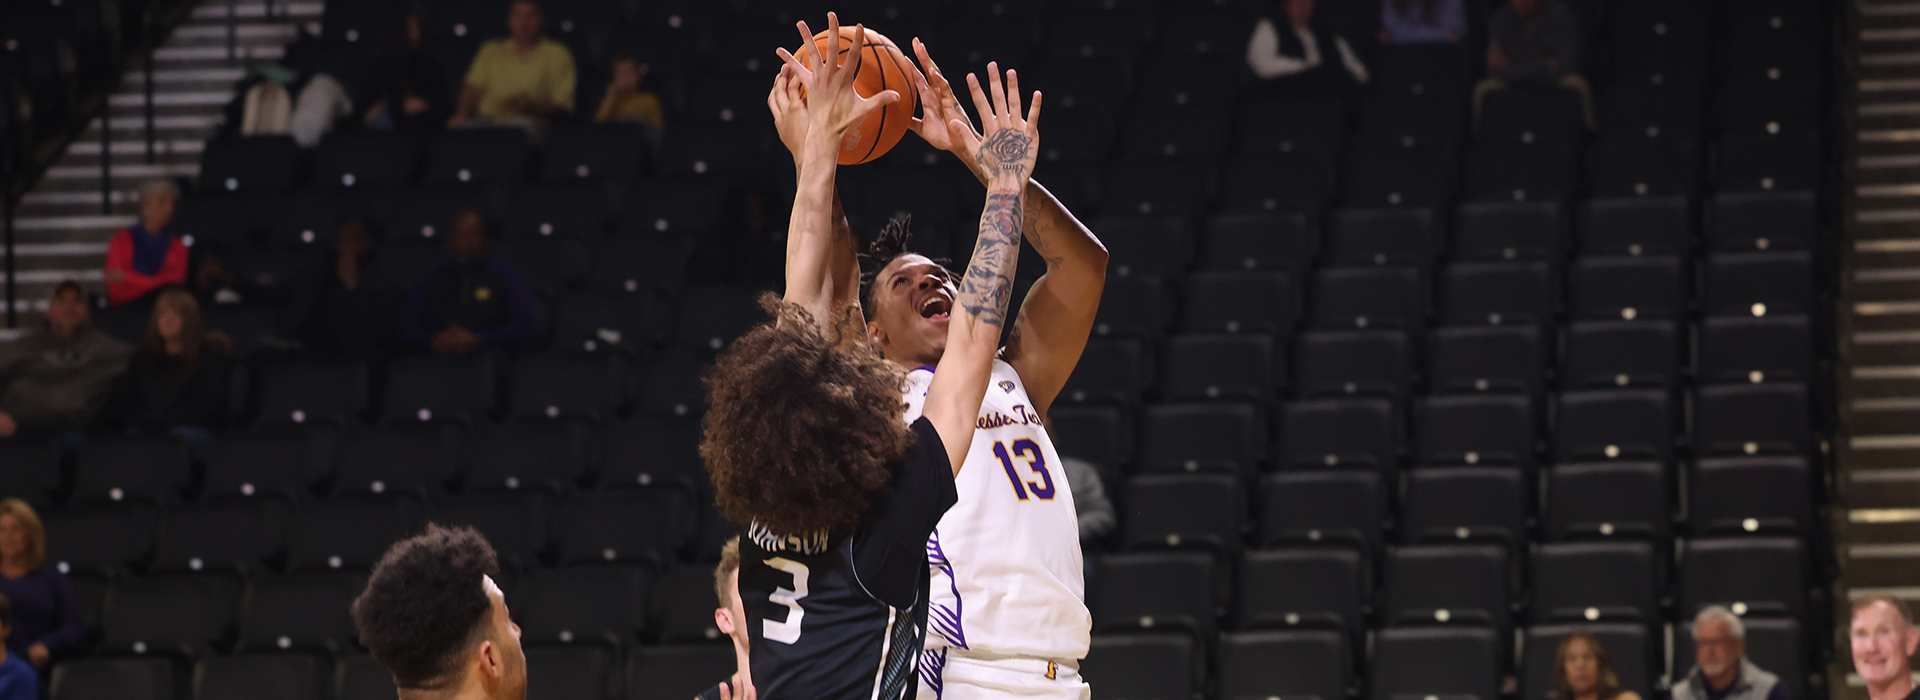 Late run guides Golden Eagles to clutch victory over North Alabama